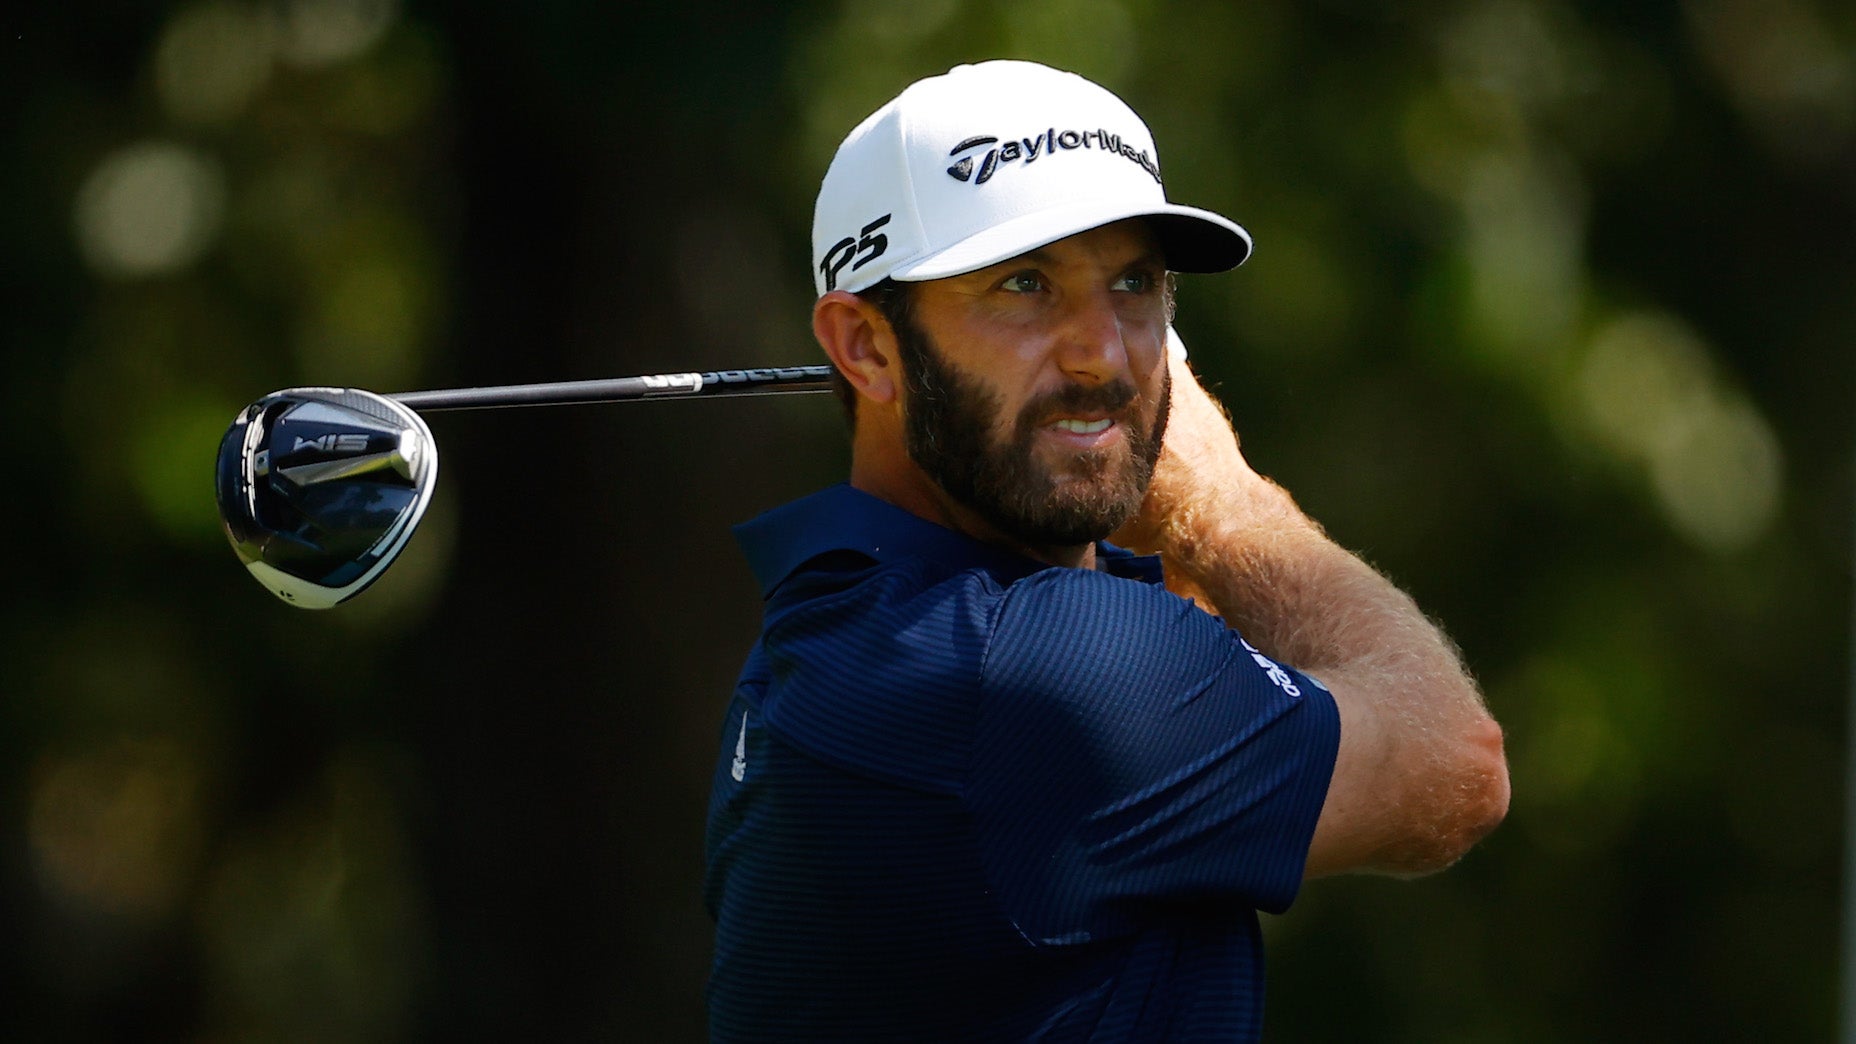 TRENDING: Is TaylorMade Breaking Up with Dustin Johnson?